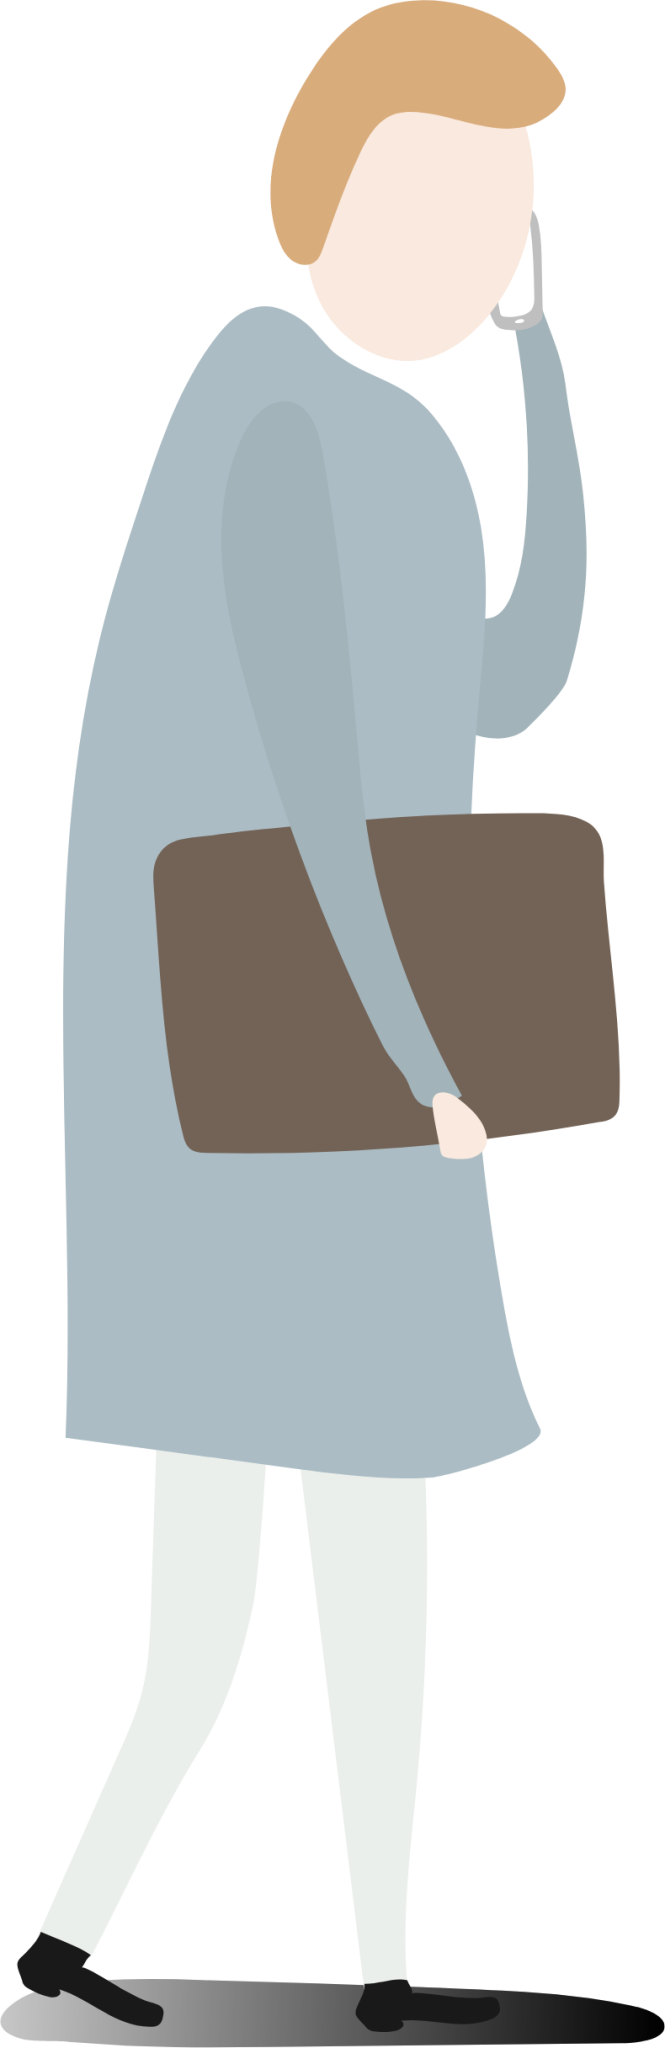 person with briefcase on the phone illustration